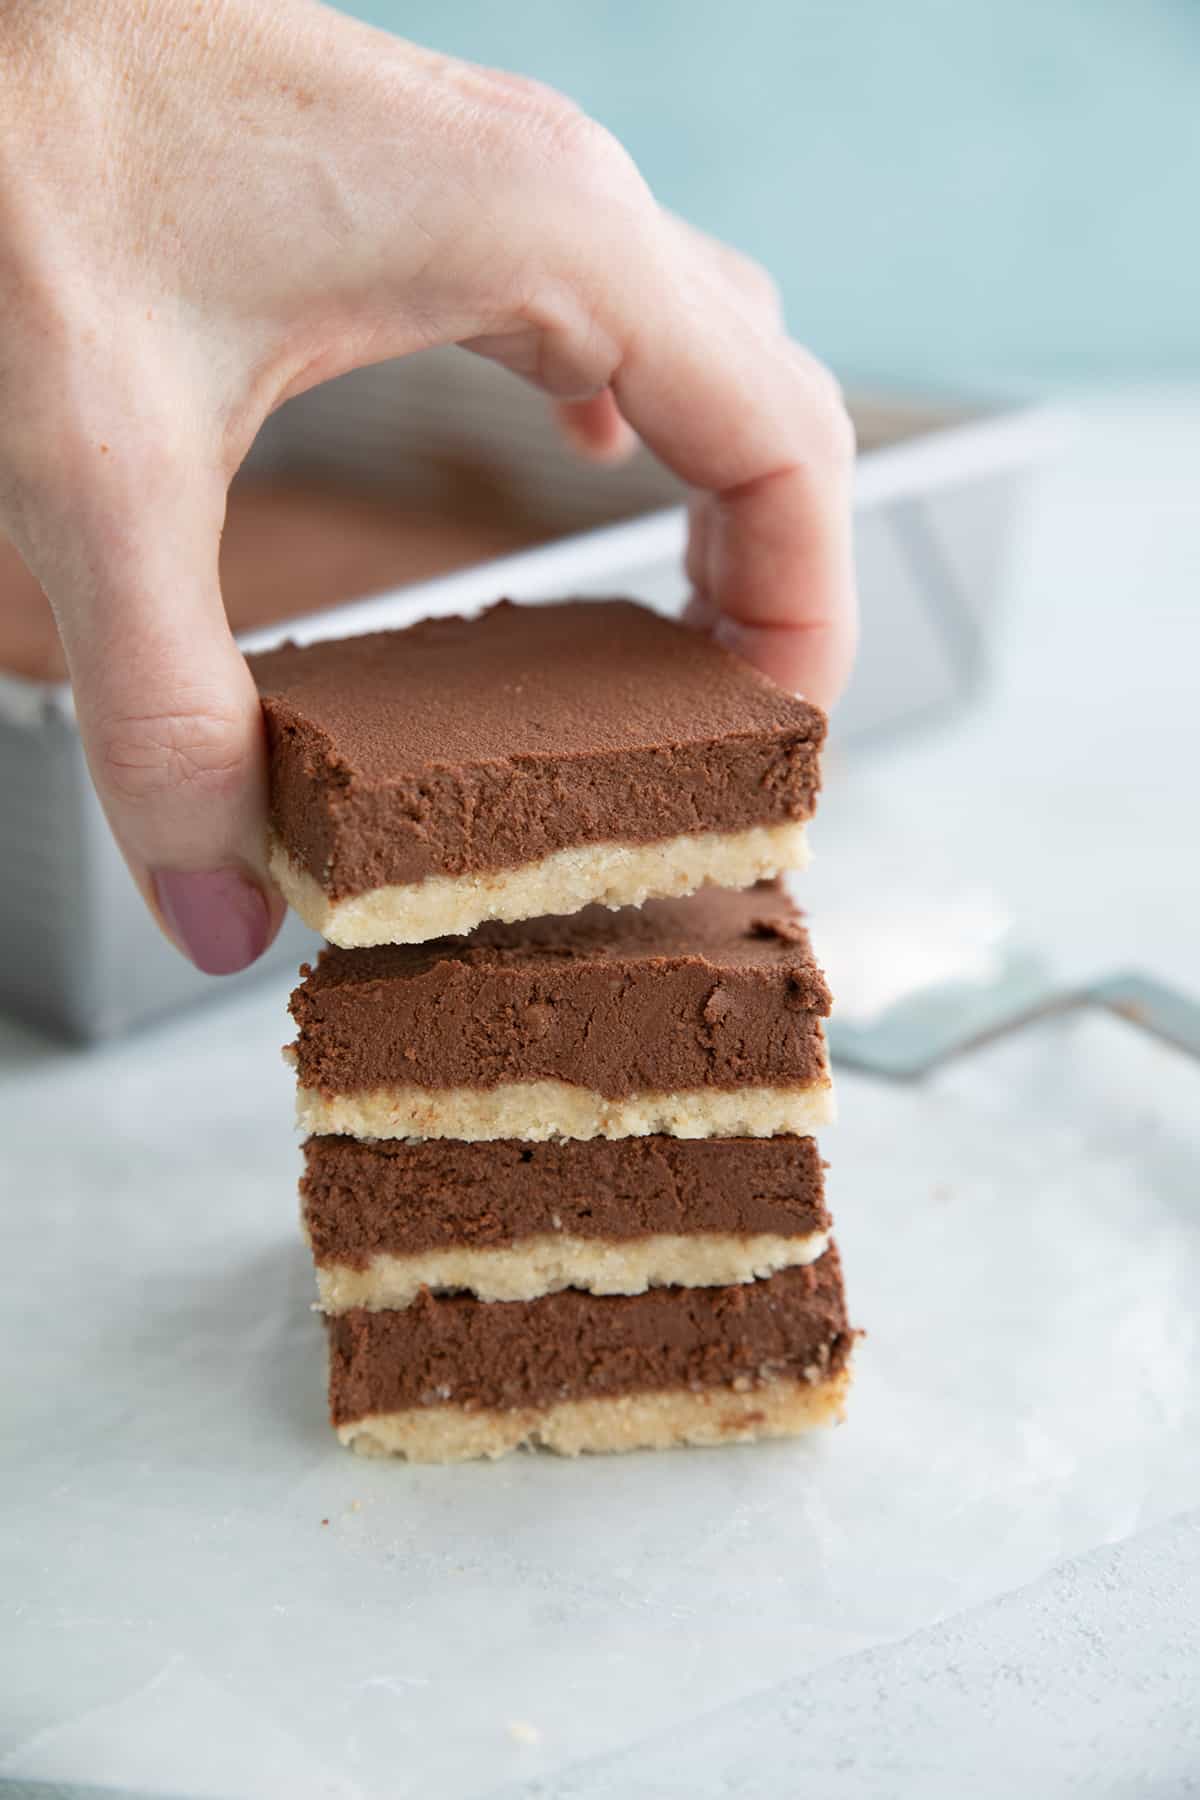 A stack of French Silk Pie Bars with a hand lifting off the top one.